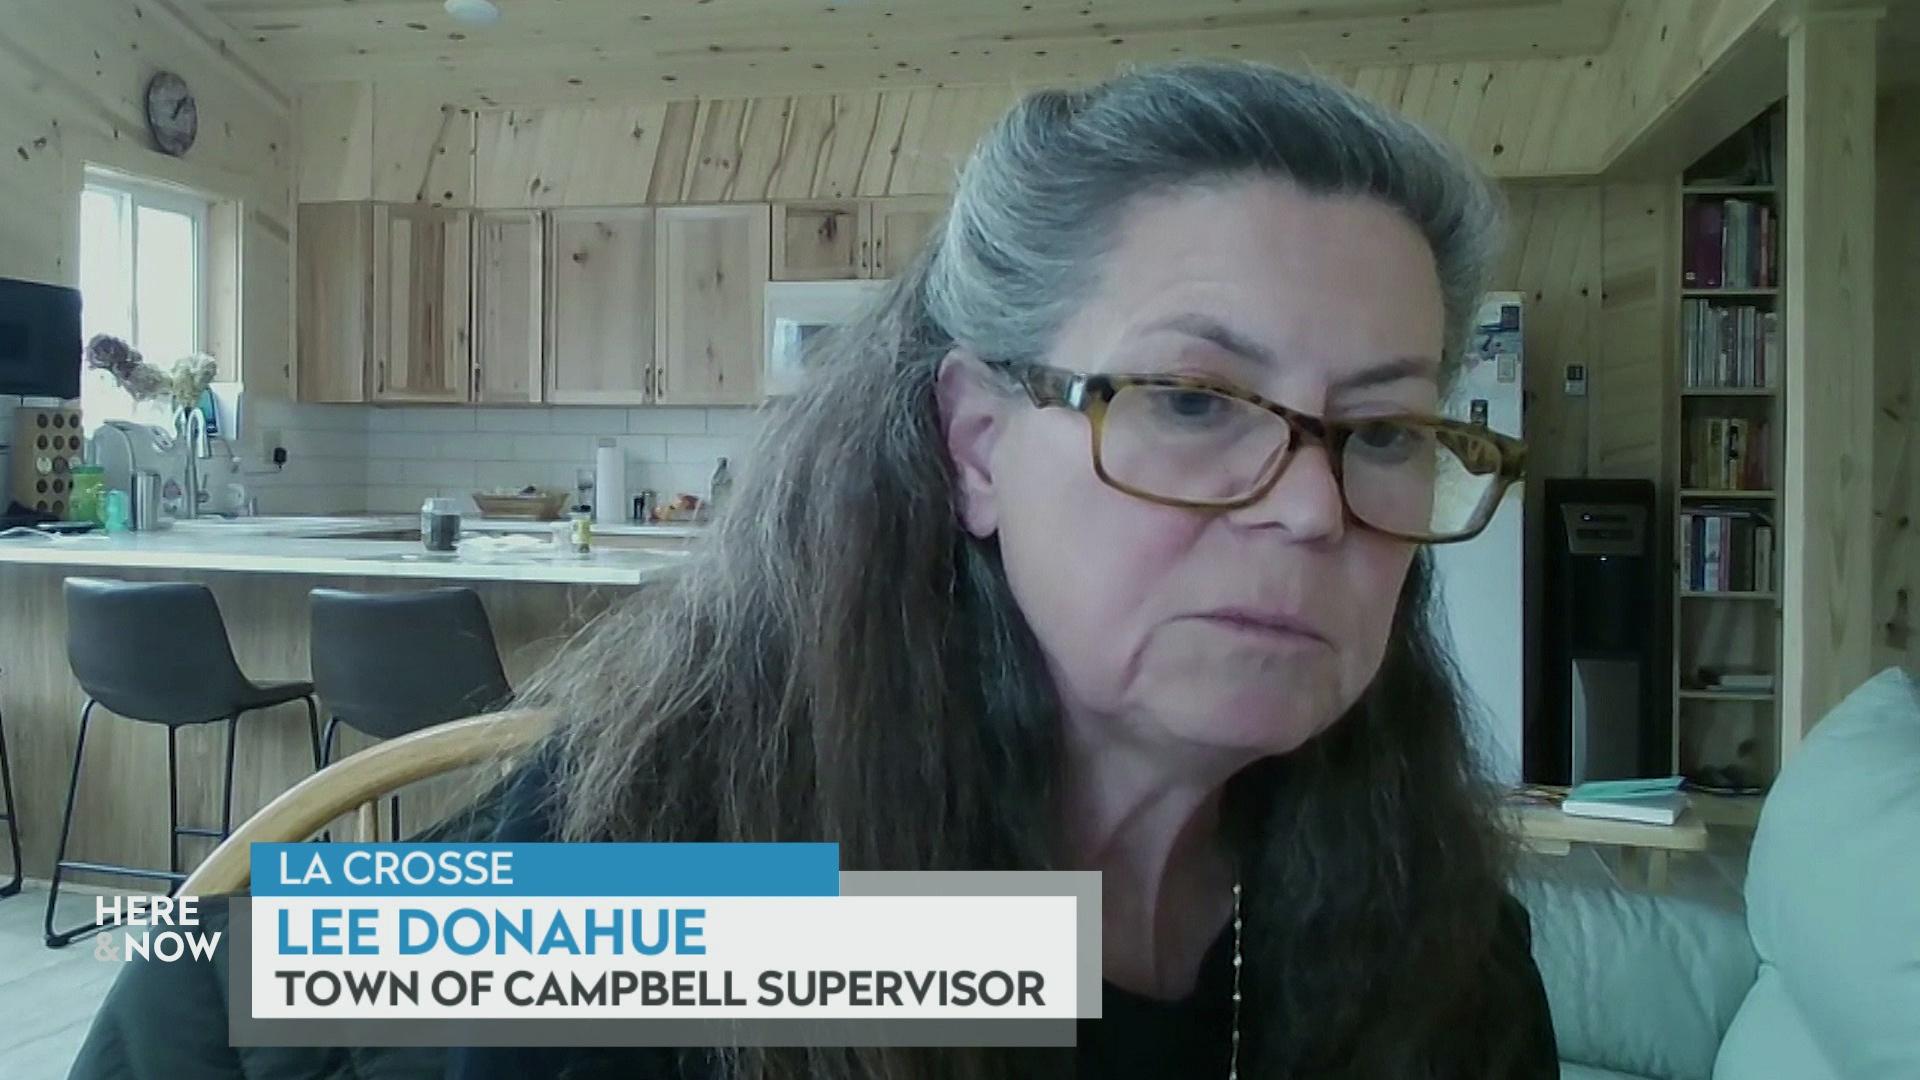 A still image from a video shows Lee Donahue seated in front of wooden cabinets and ceiling with a graphic at bottom reading 'La Crosse,' 'Lee Donahue' and 'Town of Campbell Supervisor.'